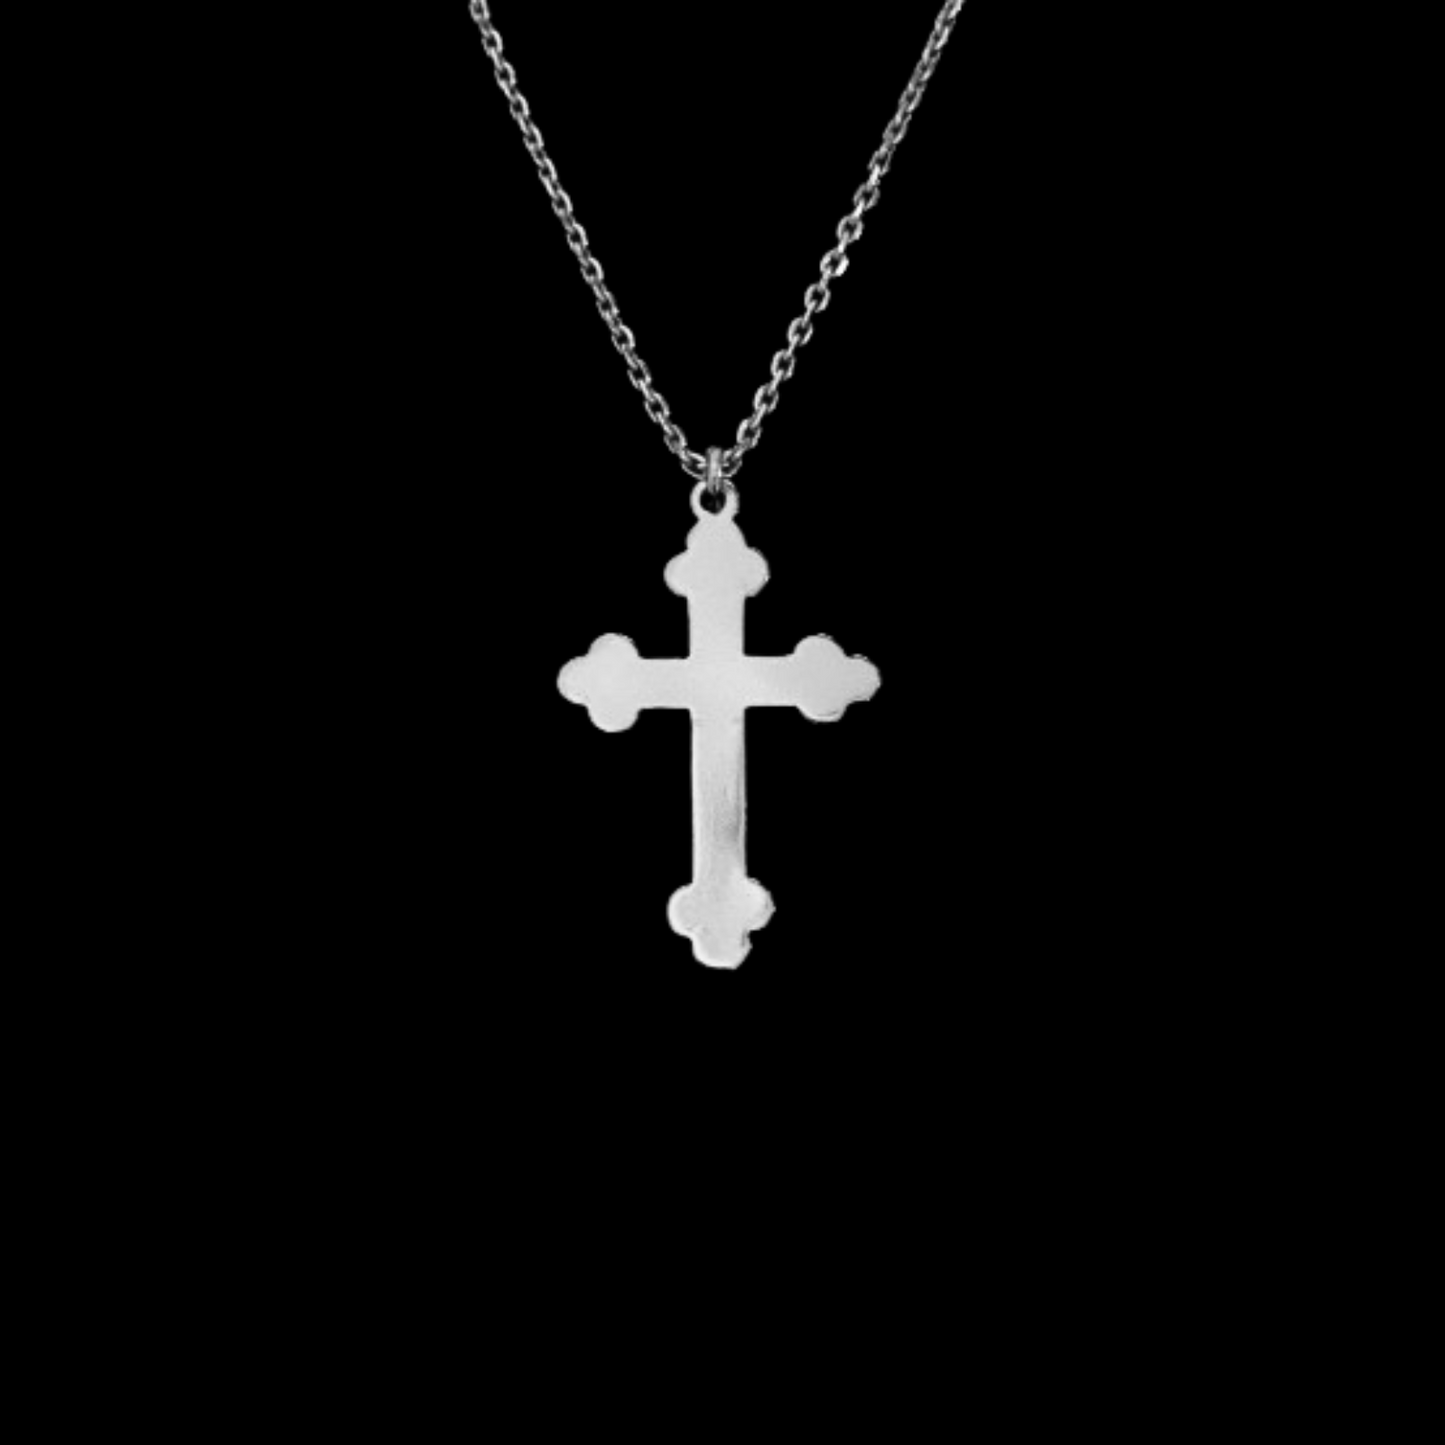 Holy Cross Necklace in 92.5 sterling silver